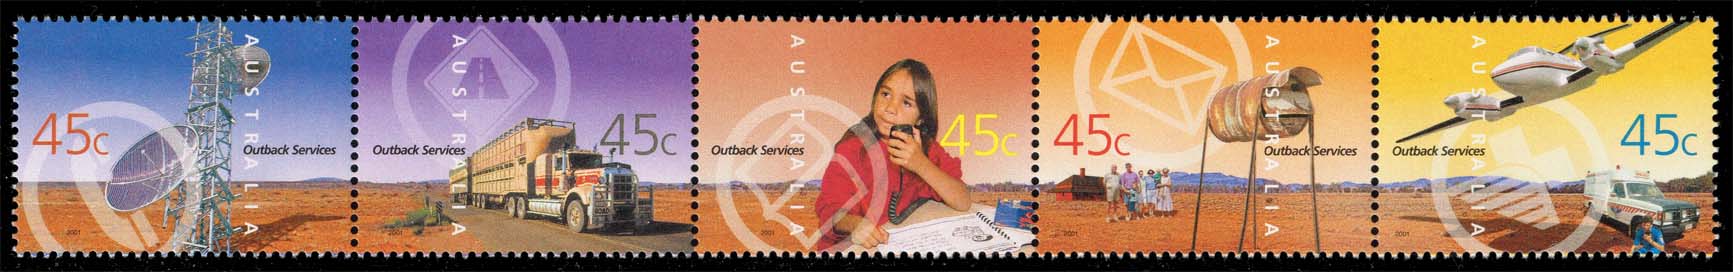 Australia #1966a Outback Services Strip of 5; MNH - Click Image to Close